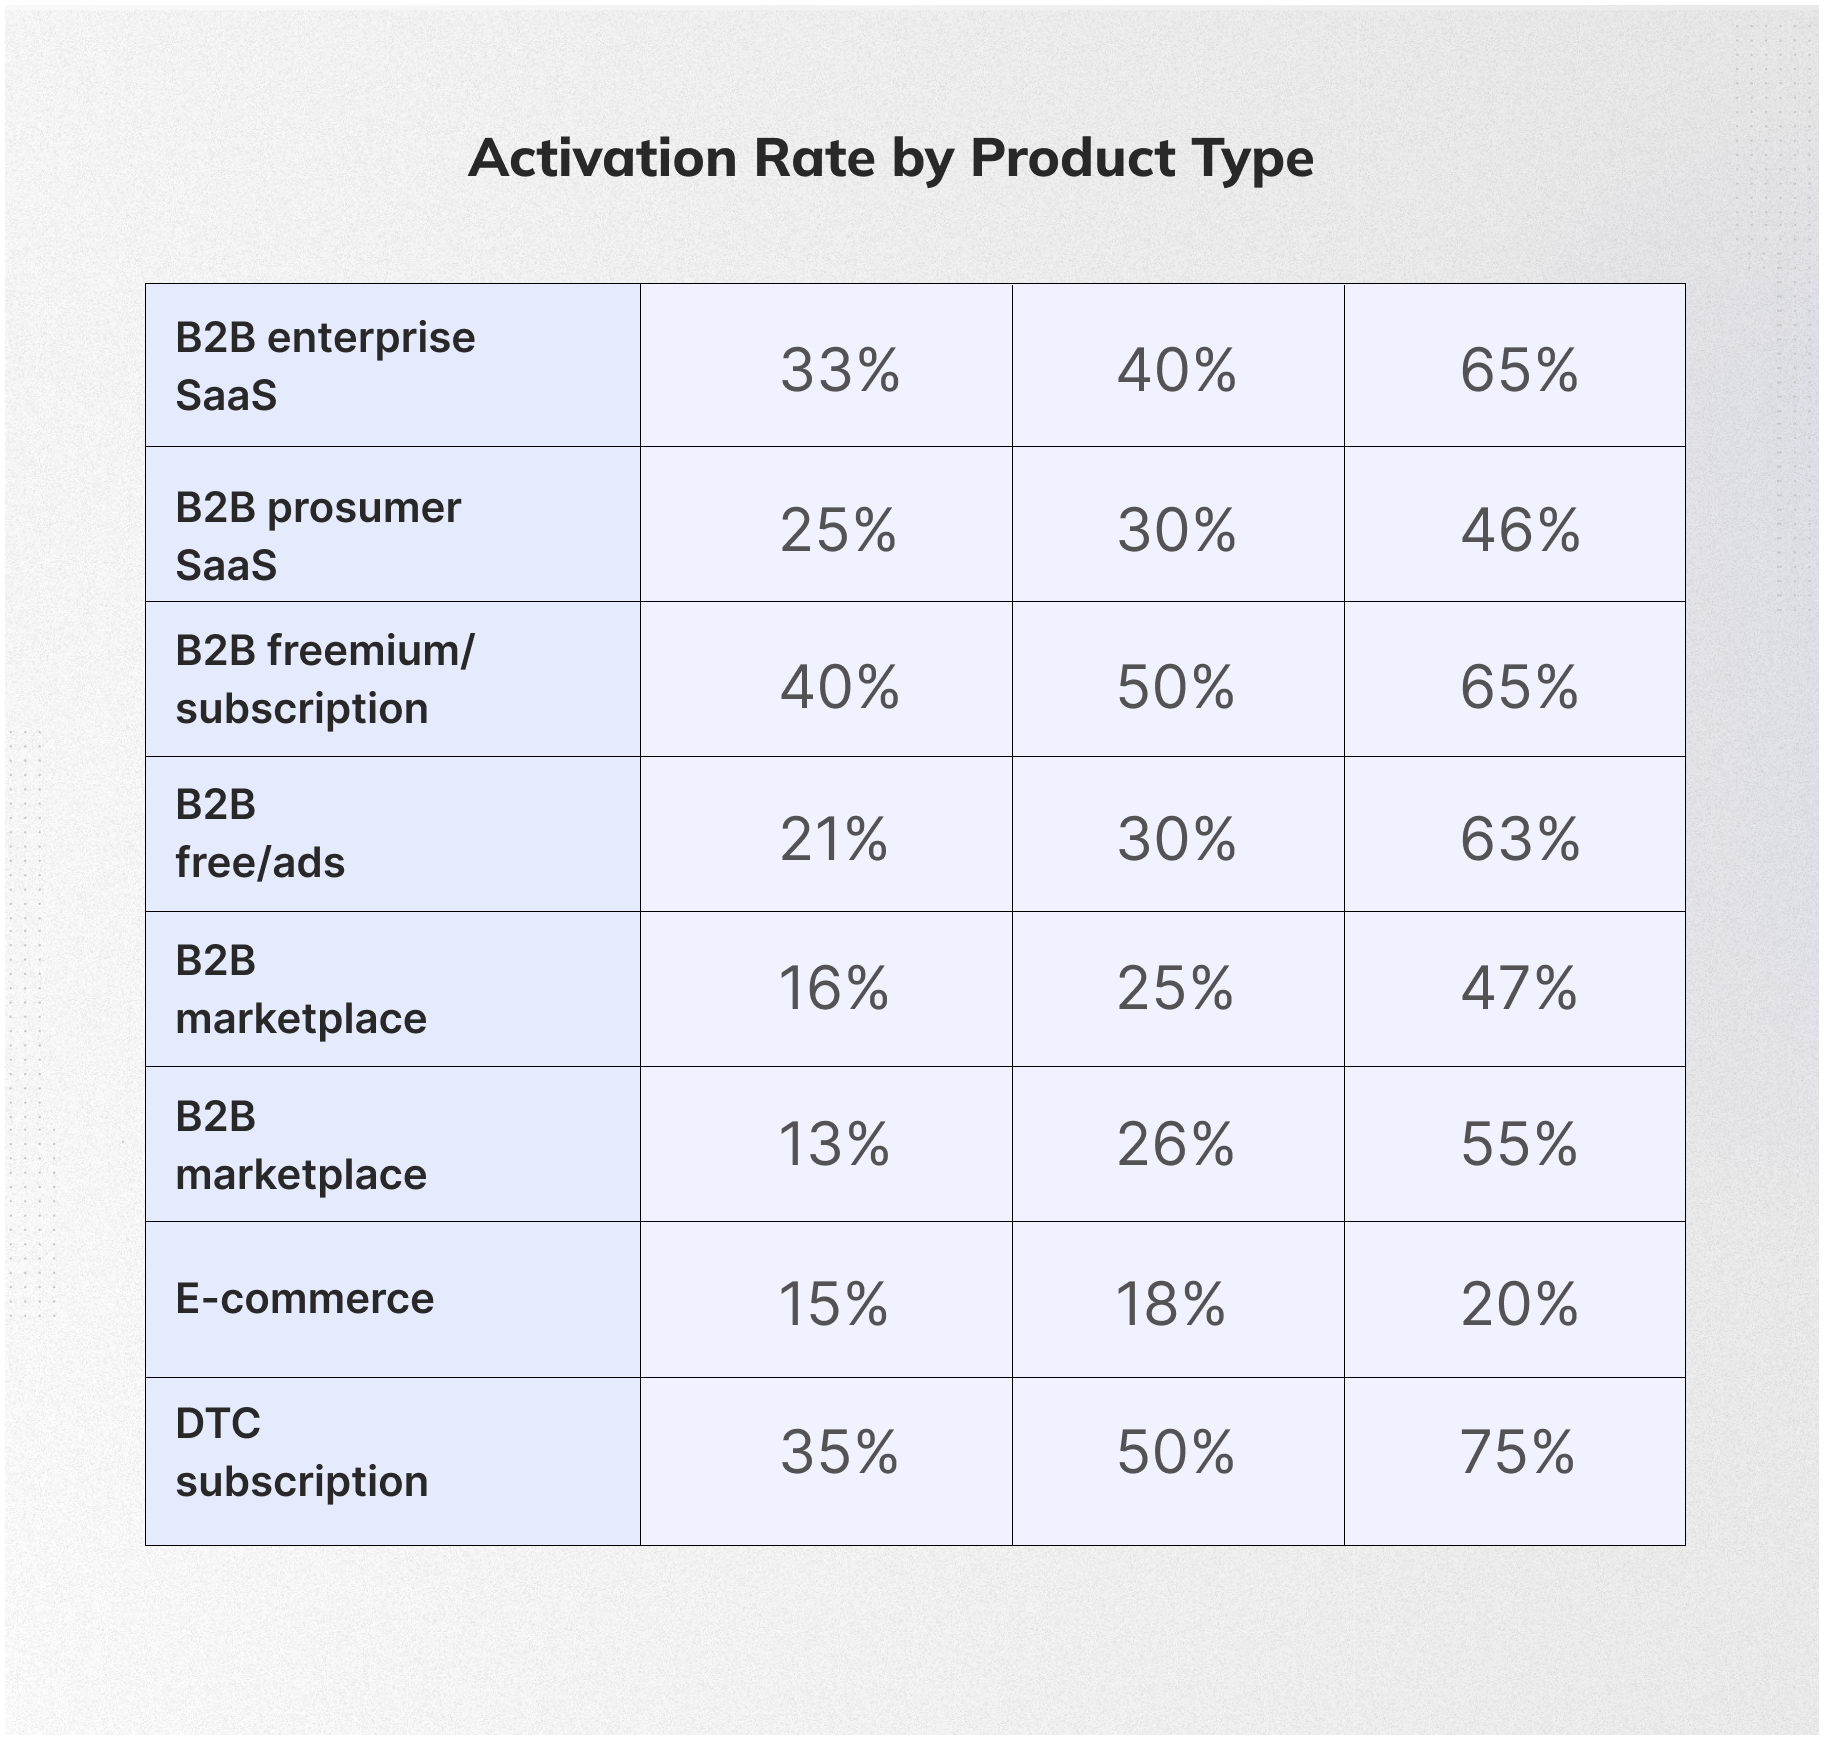 Activation rate by product type